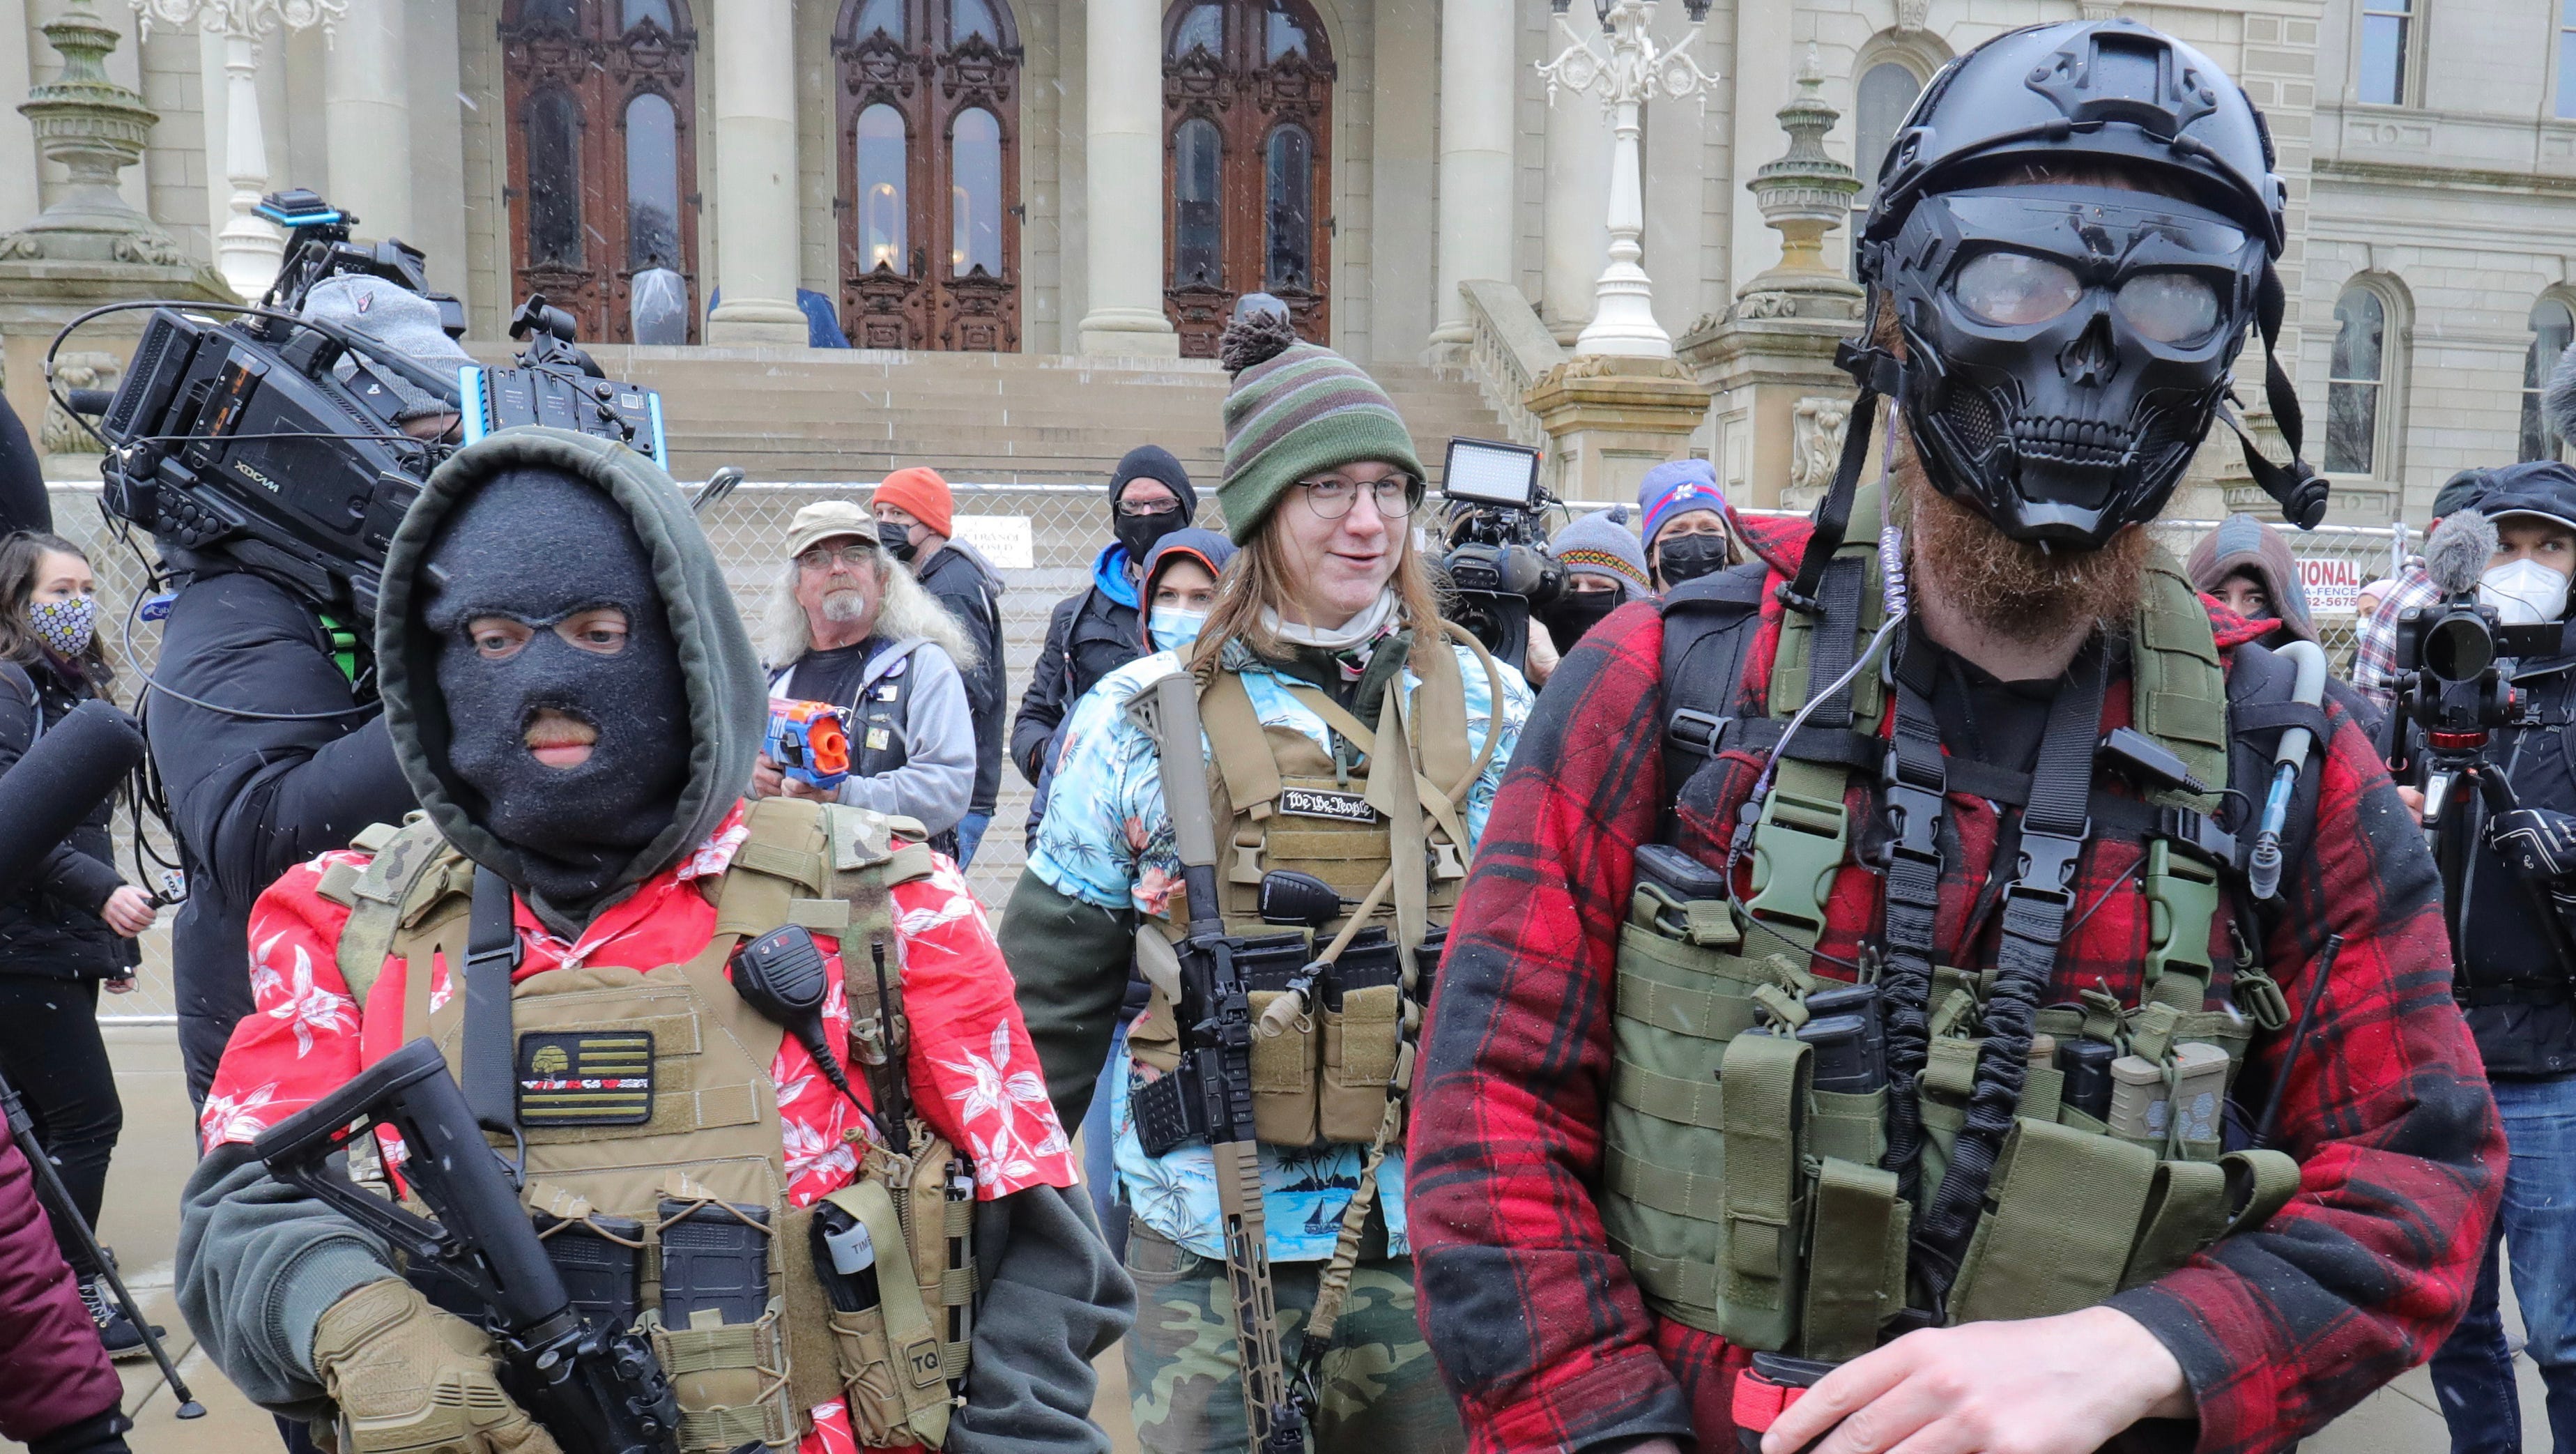 Armed members of the Boogaloo Bois are seen outside of the Capitol building in Lansing on Sunday, January 17, 2021.